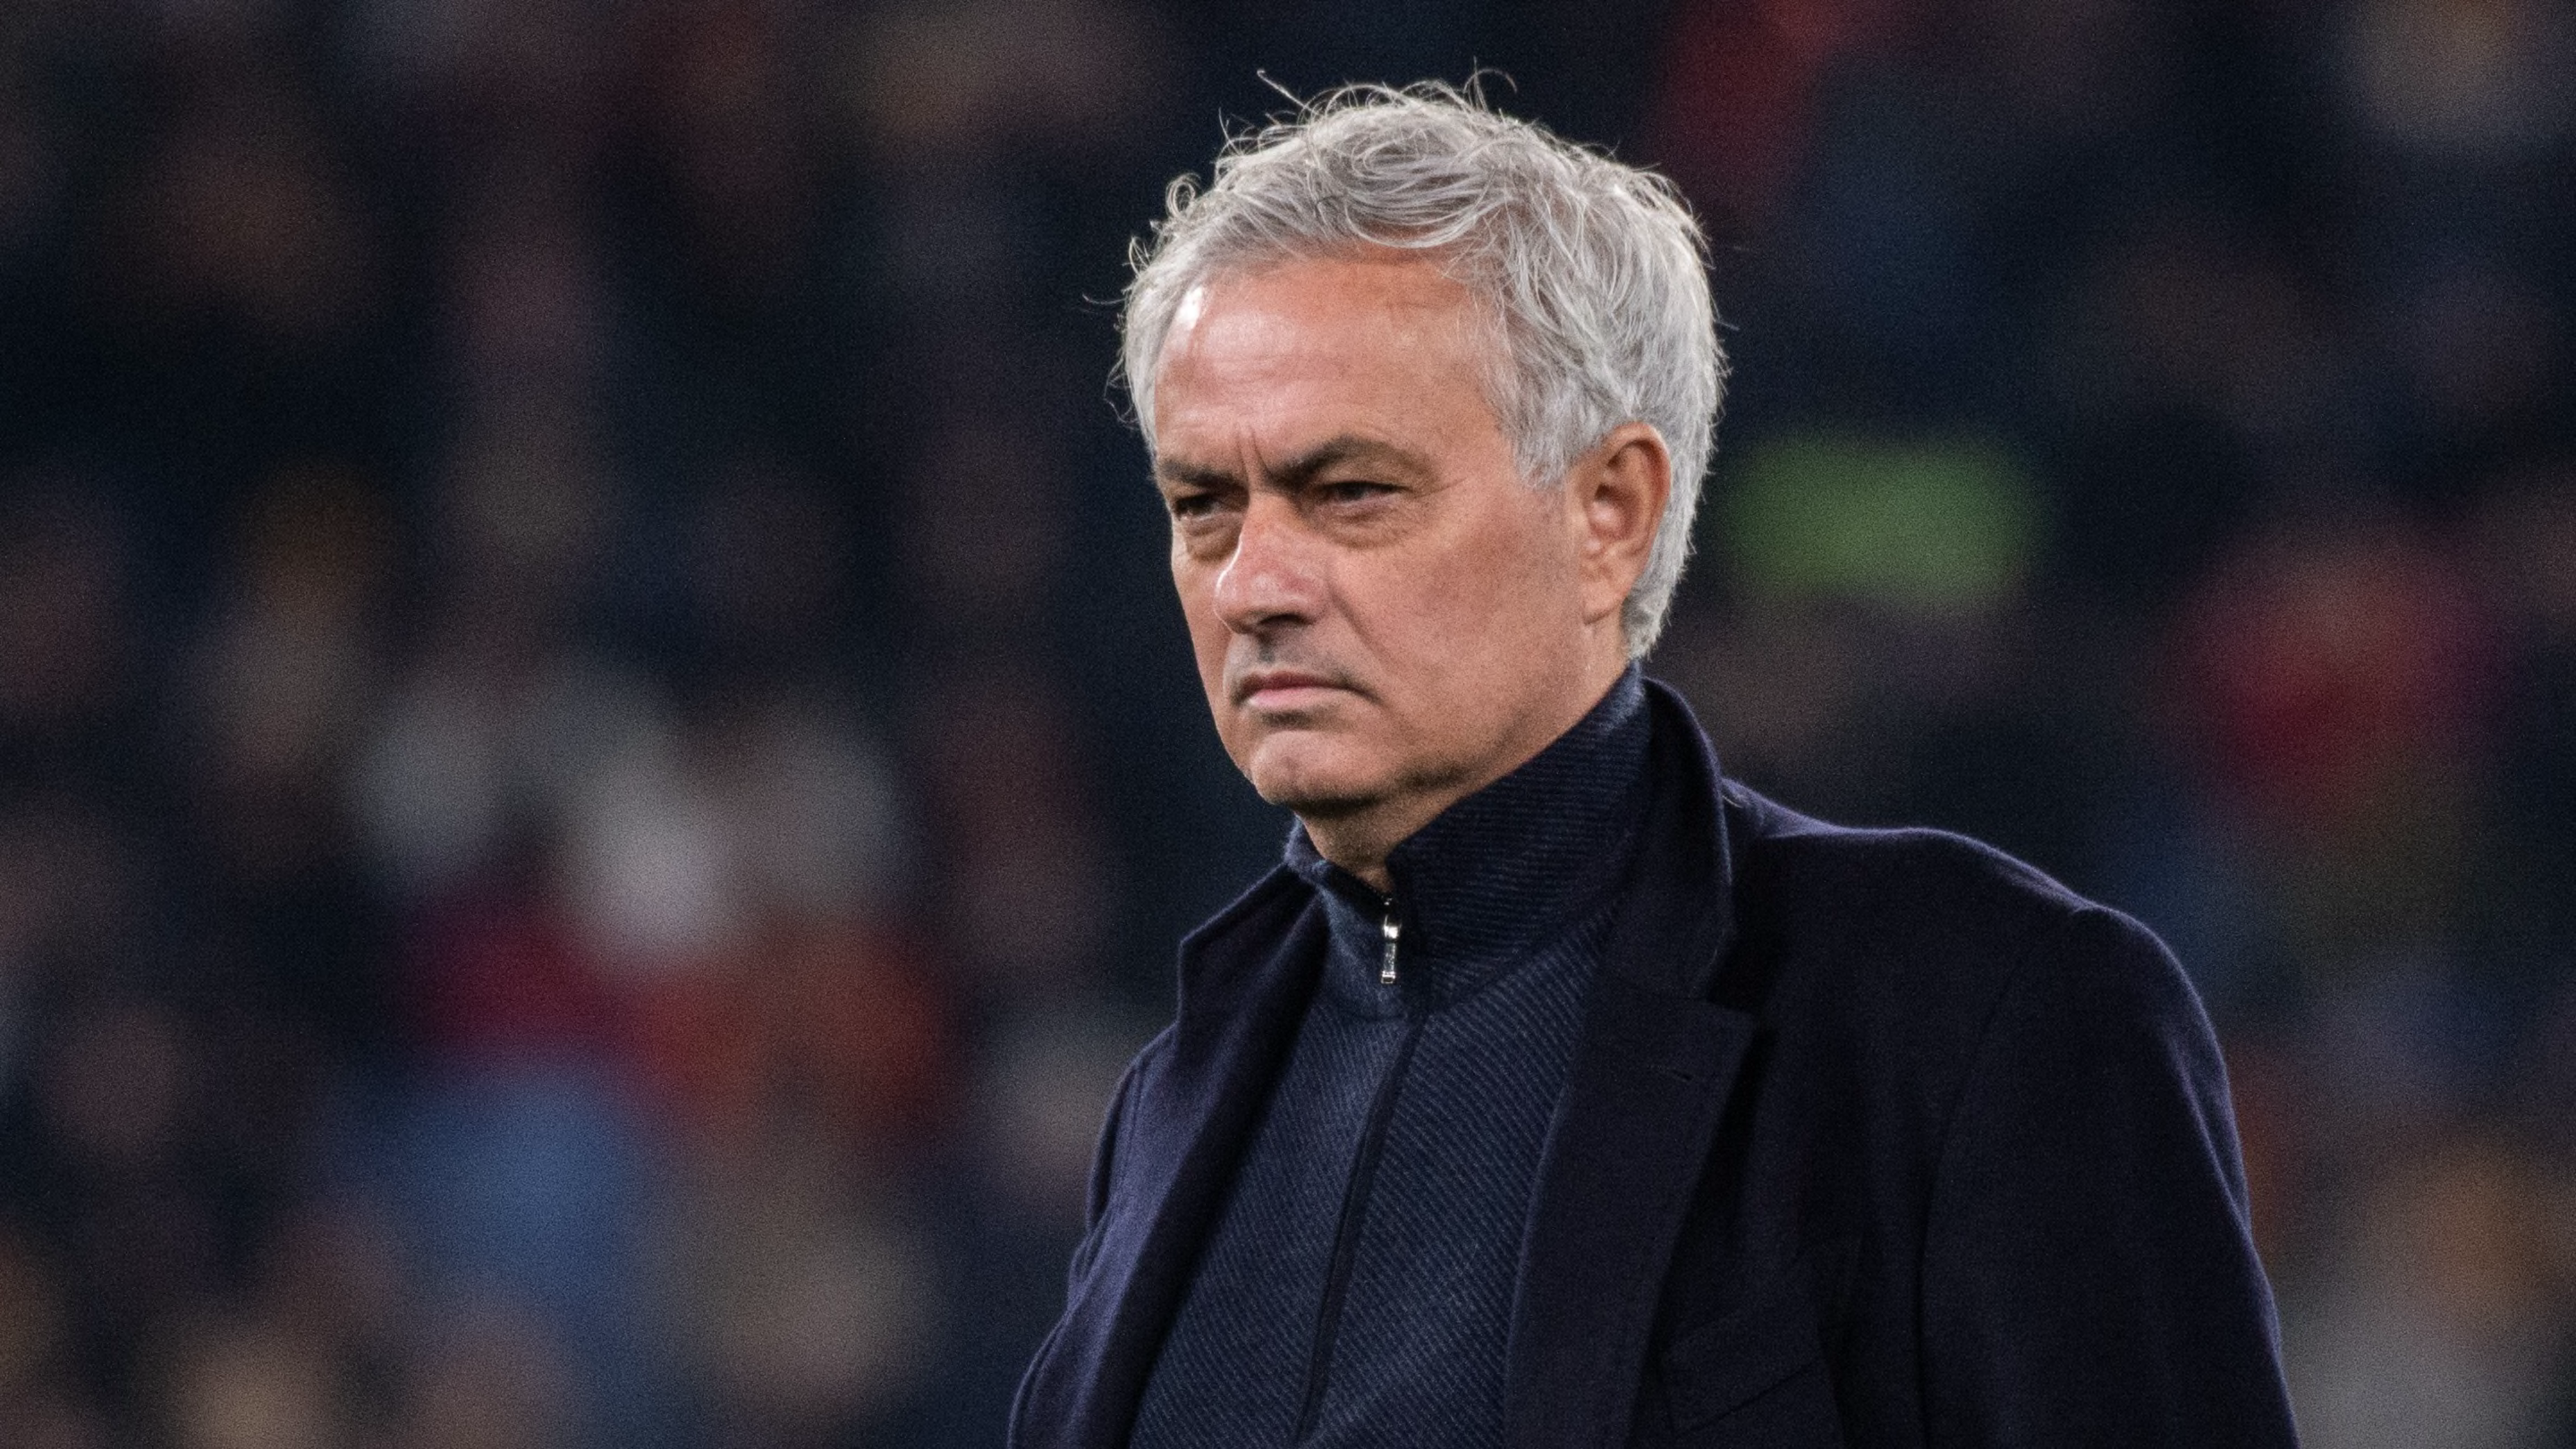 Jose Mourinho confirmed as new manager of Fenerbahce